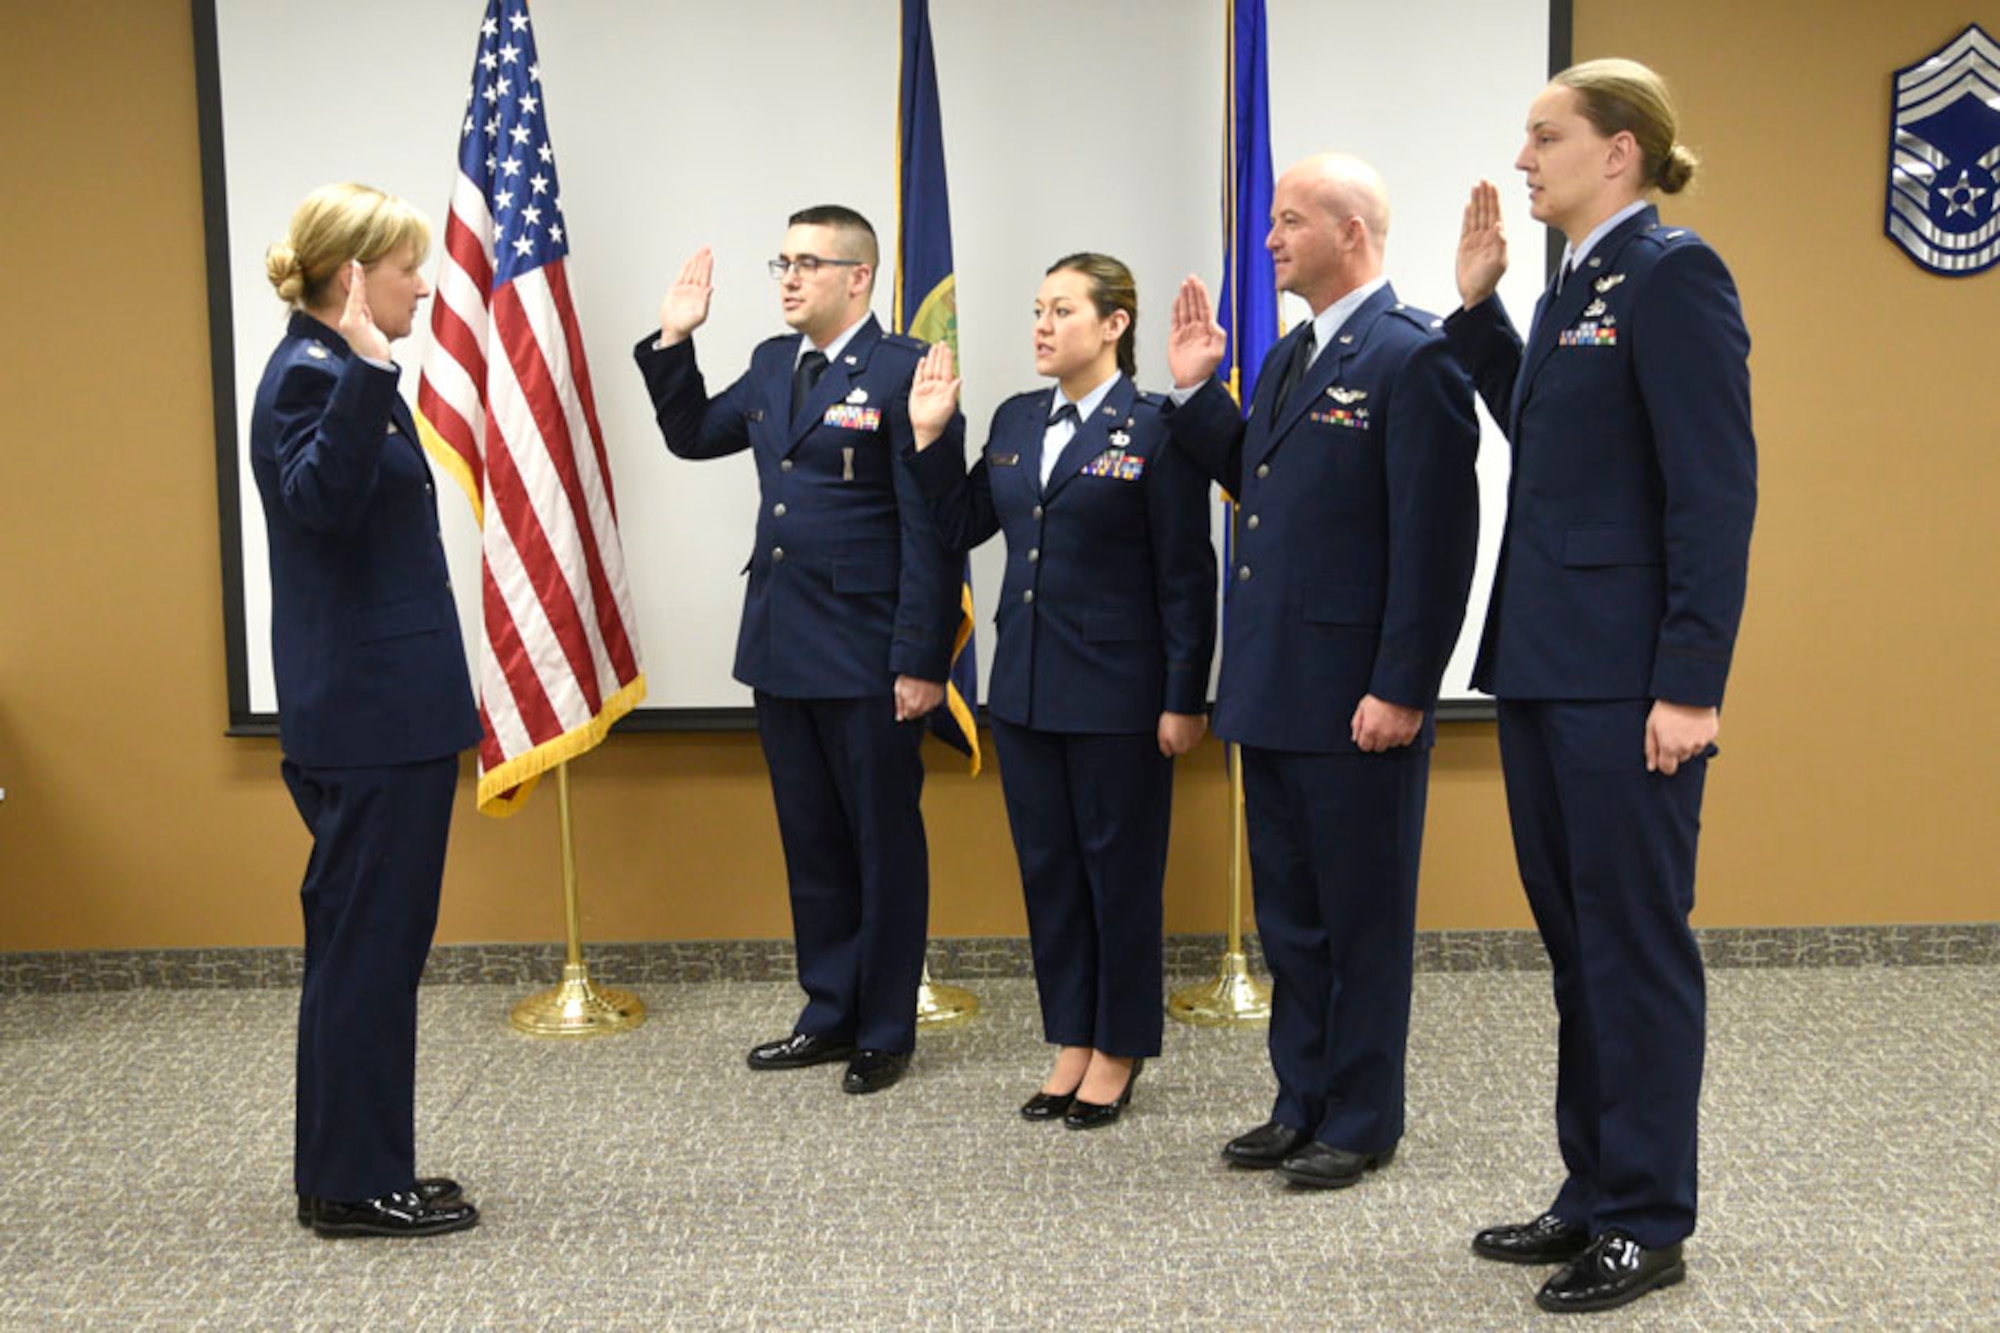 120th Airlift Wing Executive Officer Maj. Maureen Maphies administers oaths to 1st Lts. Bradley J. Gauvin, Caressa L. Hewitt, Raymond R. Orsua and Cassandra L. Ross during a promotion ceremony held on base Dec. 16, 2016. (U.S. Air National Guard photo/Senior Master Sgt. Eric Peterson)